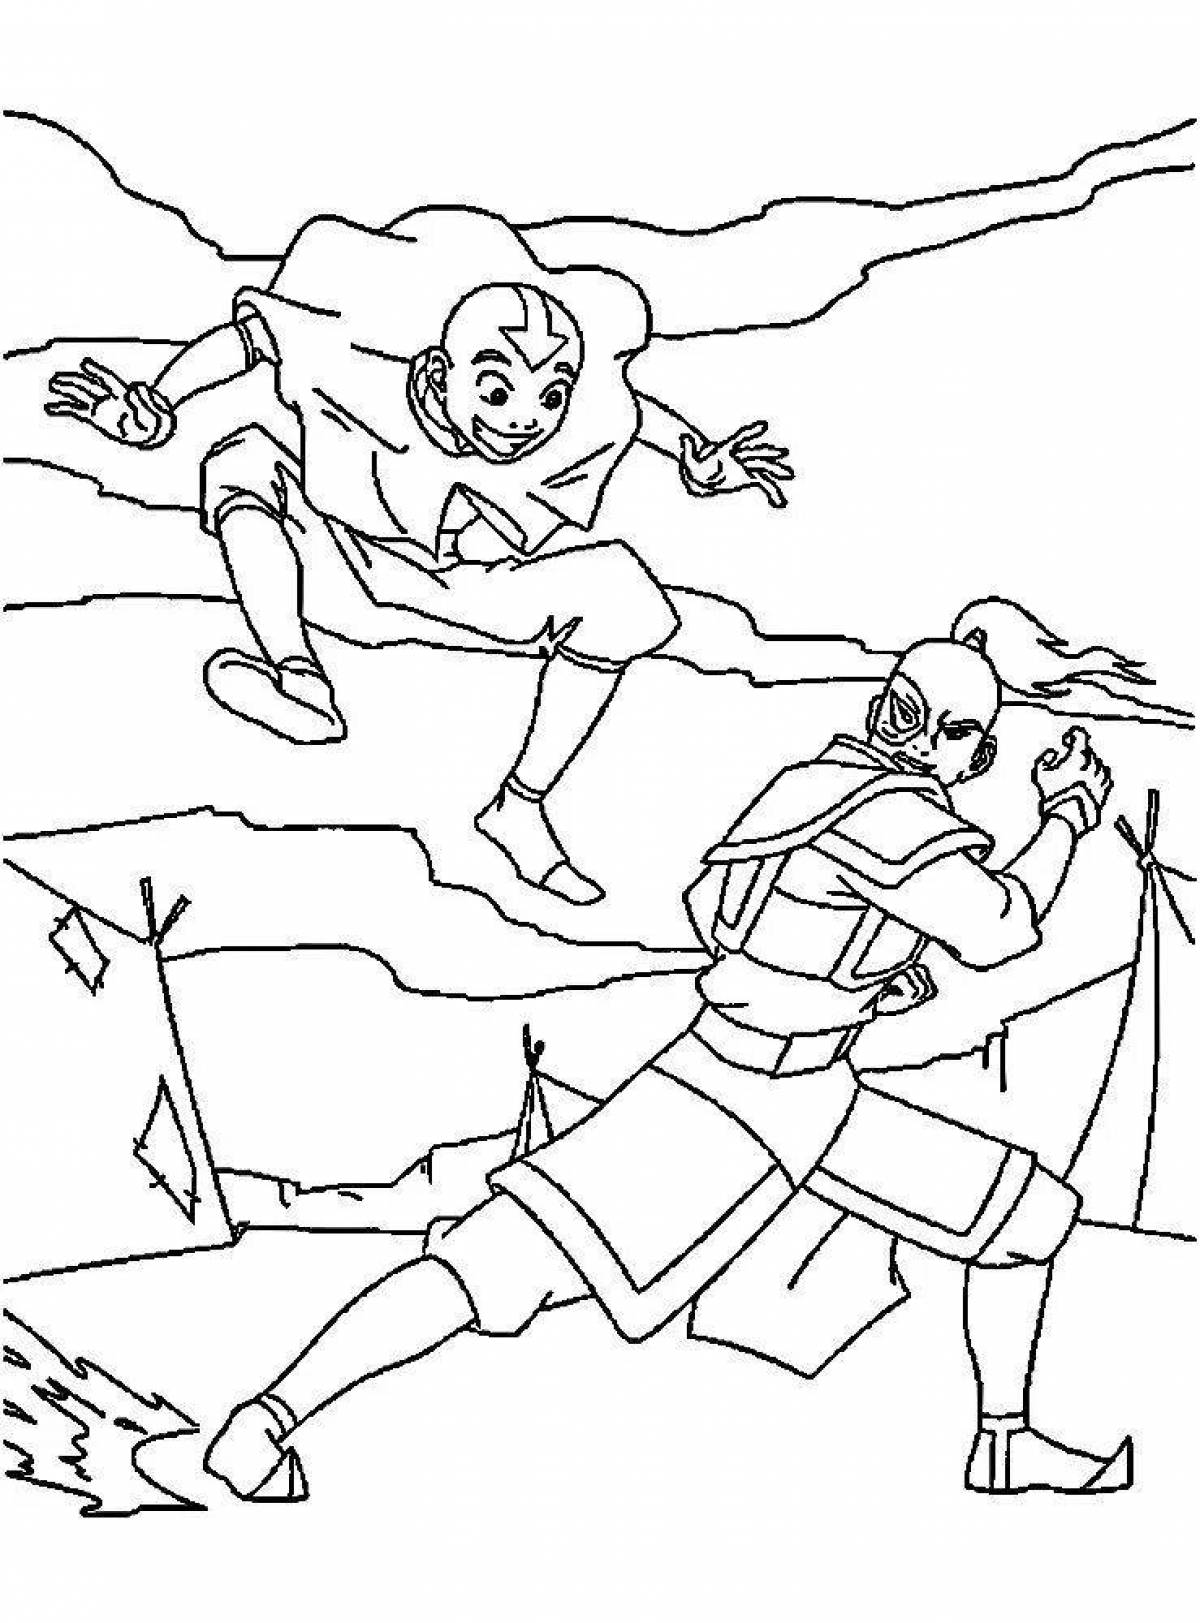 Aang playful avatar coloring page